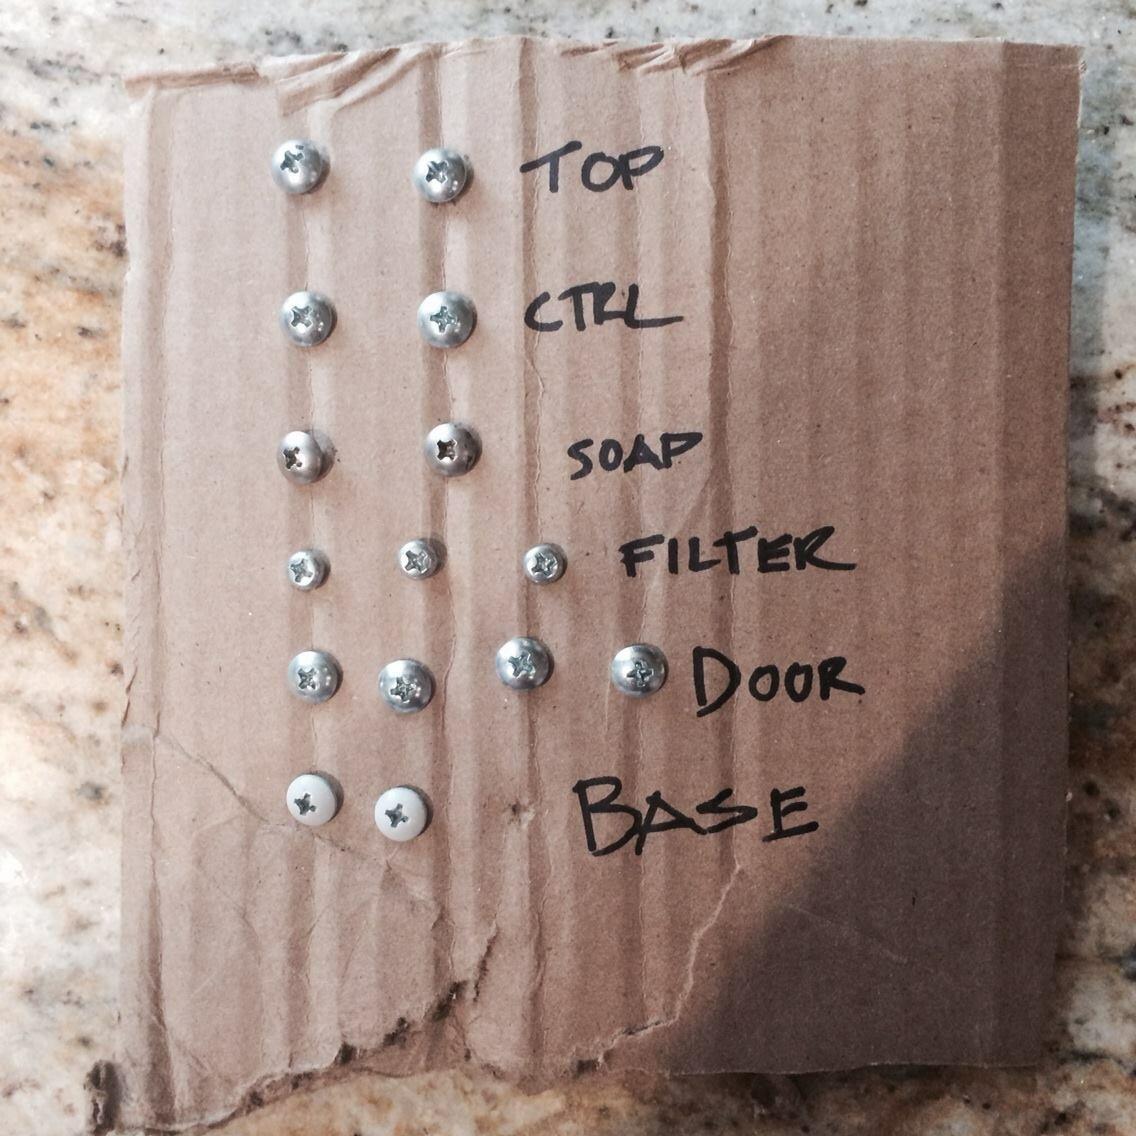 When disassembling items, punch your screws thru some cardboard and label the sets. This will help you retain your hardware, remember placement and order of reassembly